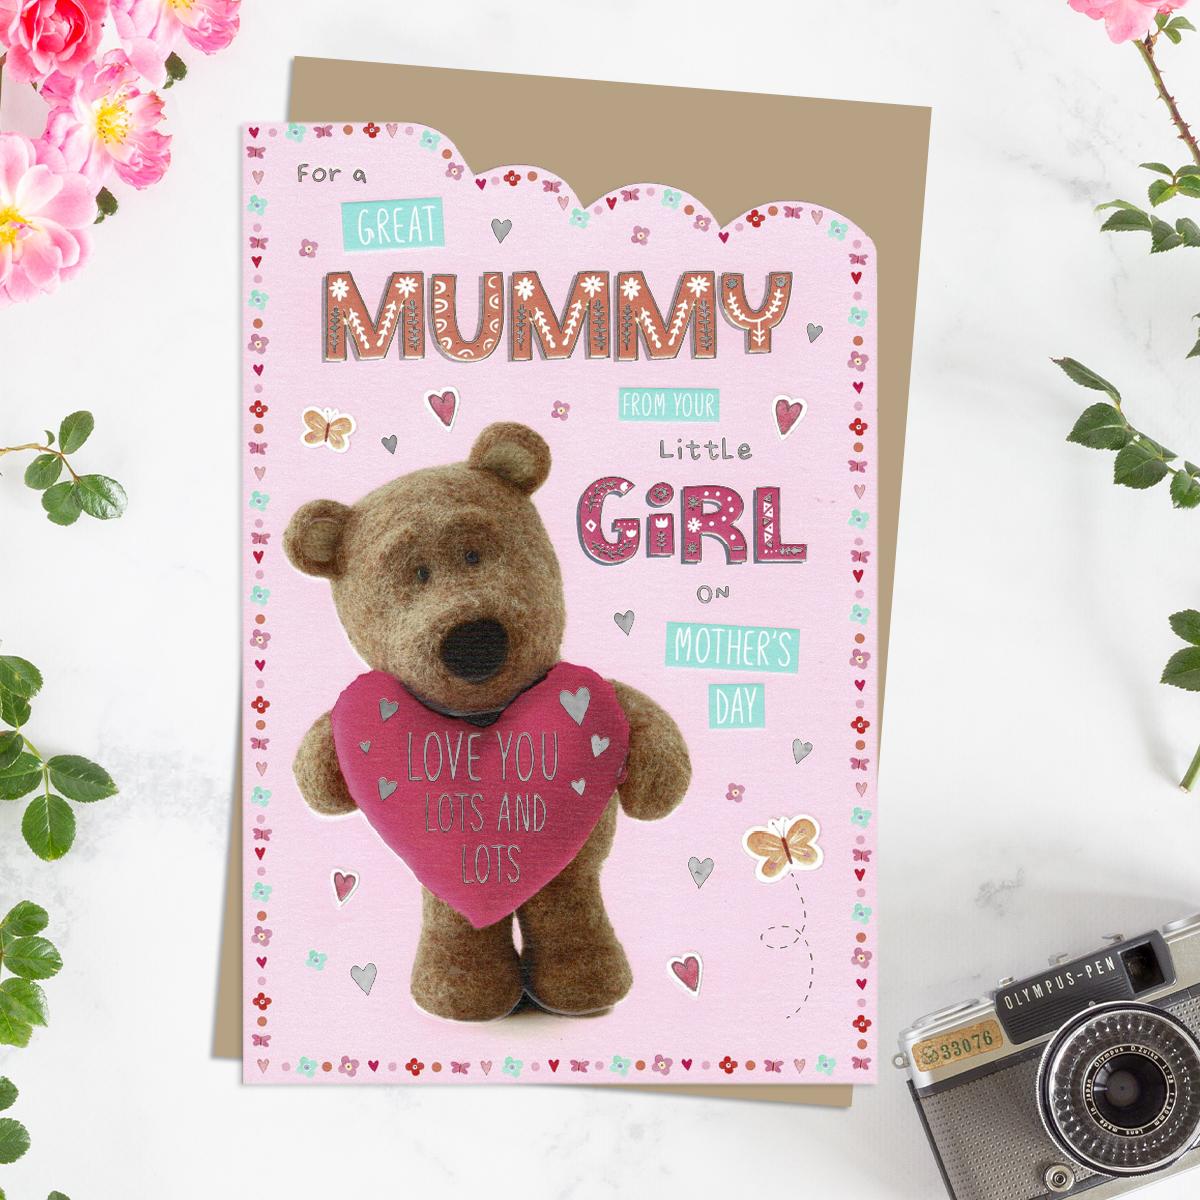 ' For A Great Mummy From Your Little Girl On Mother's Day' Card Featuring Barley Bear With Pink Heart! Complete With Silver Foiling Detail And Brown Envelope